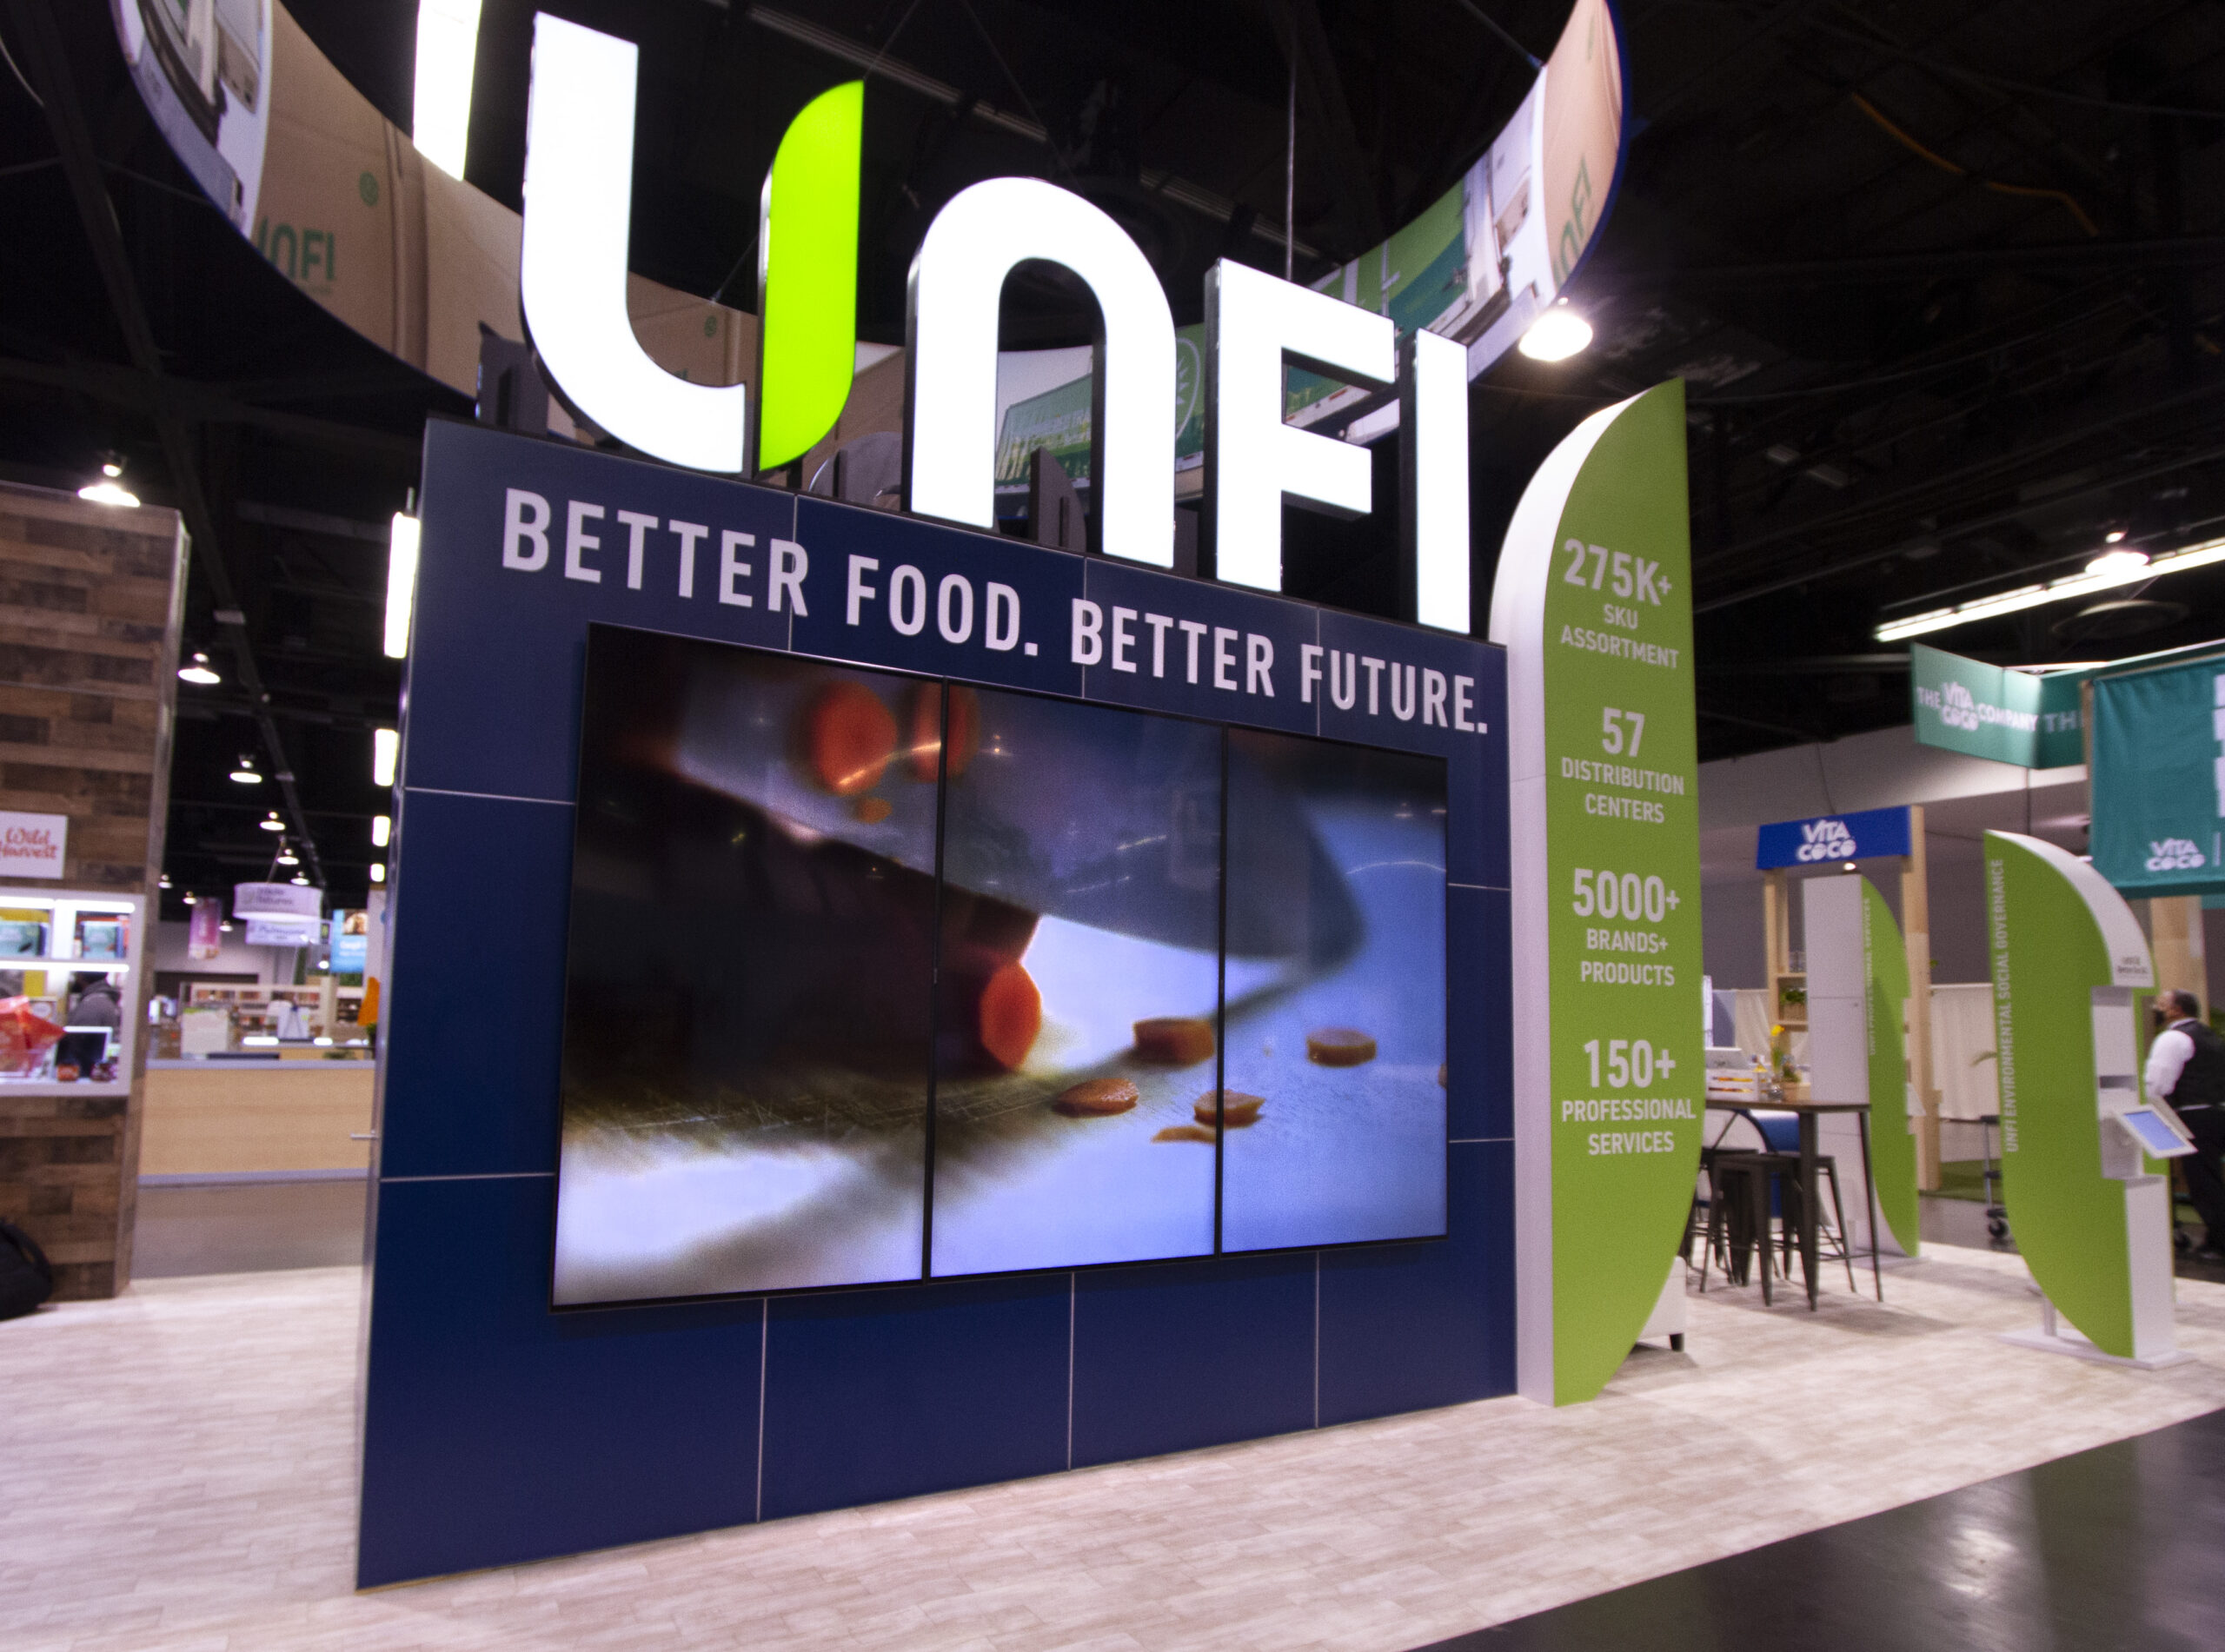 Left View of the Video Monitor Area at the UNFI Exhibit at the Natural Products Expo West Show